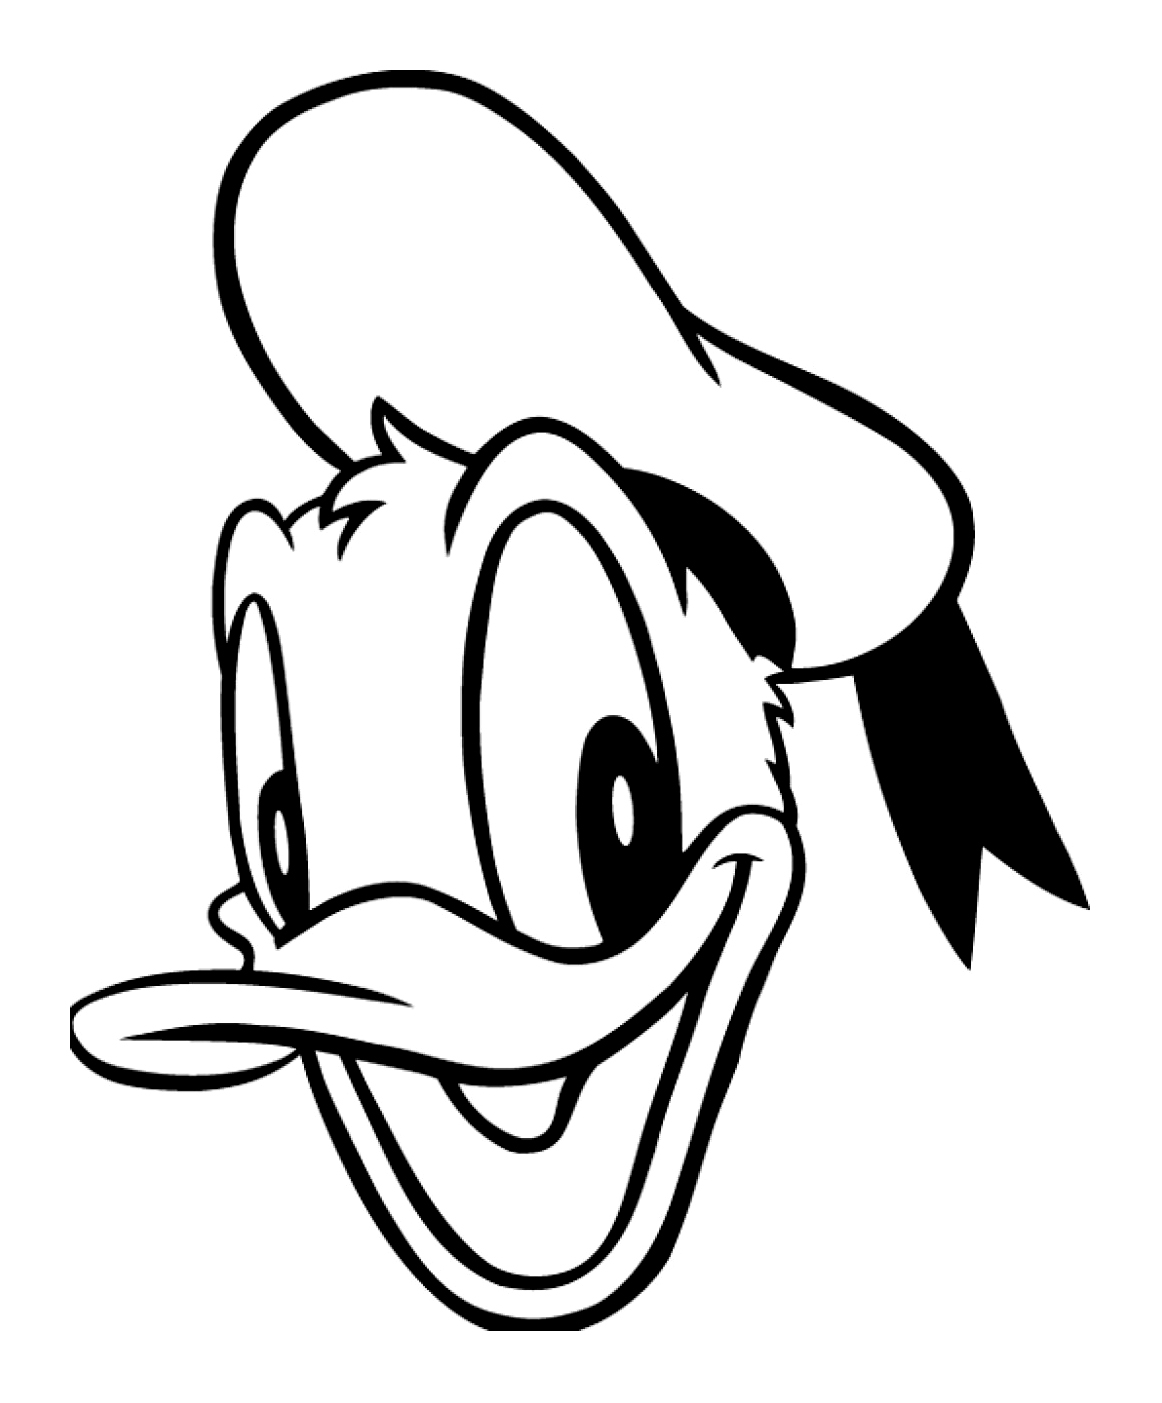 Printable Donald face image to cut out and color